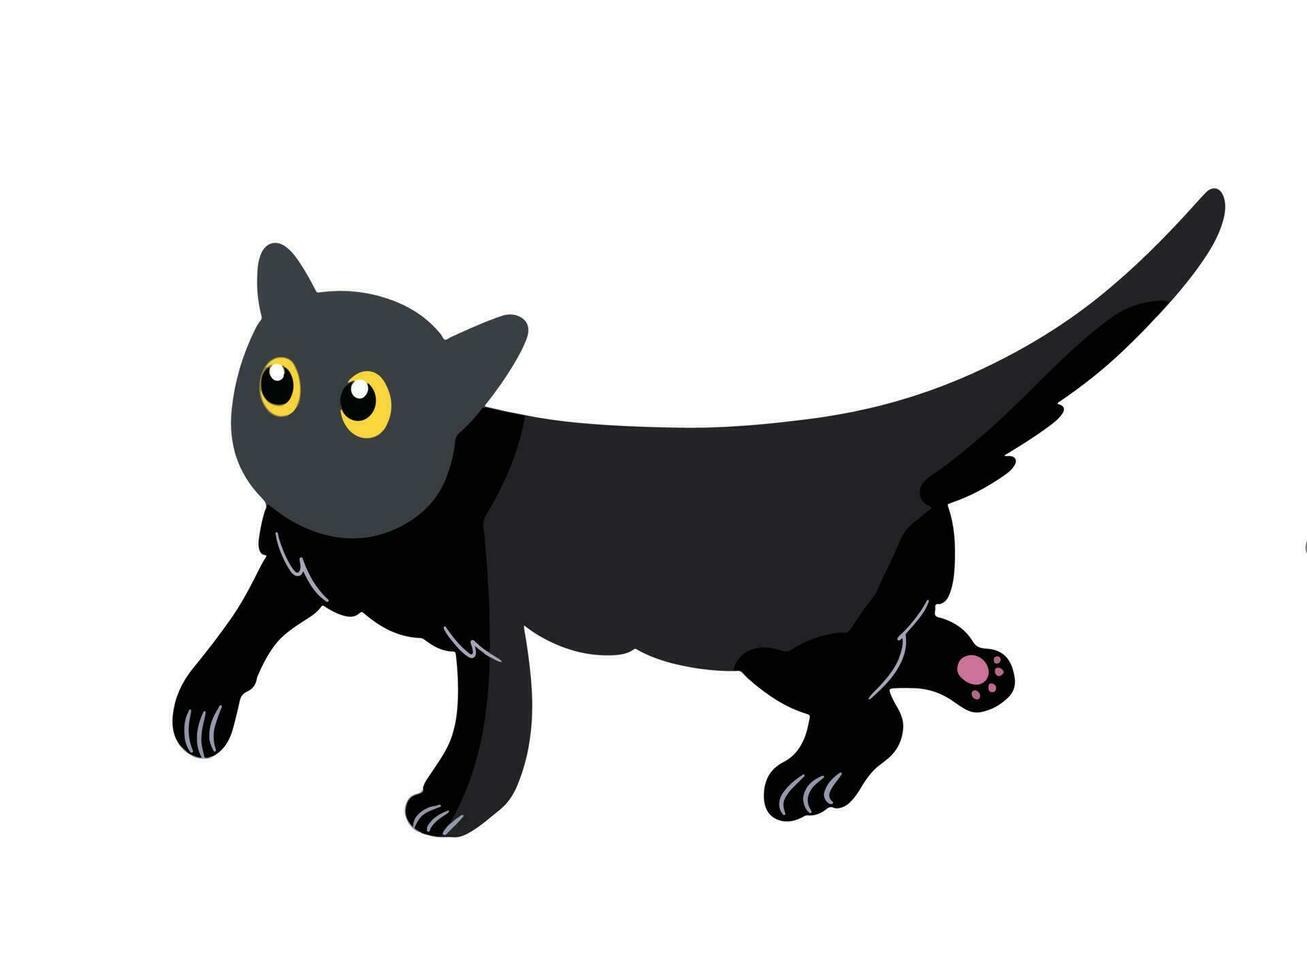 Cute walking black cat with yellow eyes vector illustration isolated on horizontal white background. Simple and flat art styled drawing. Kawaii pet or animal illustration.